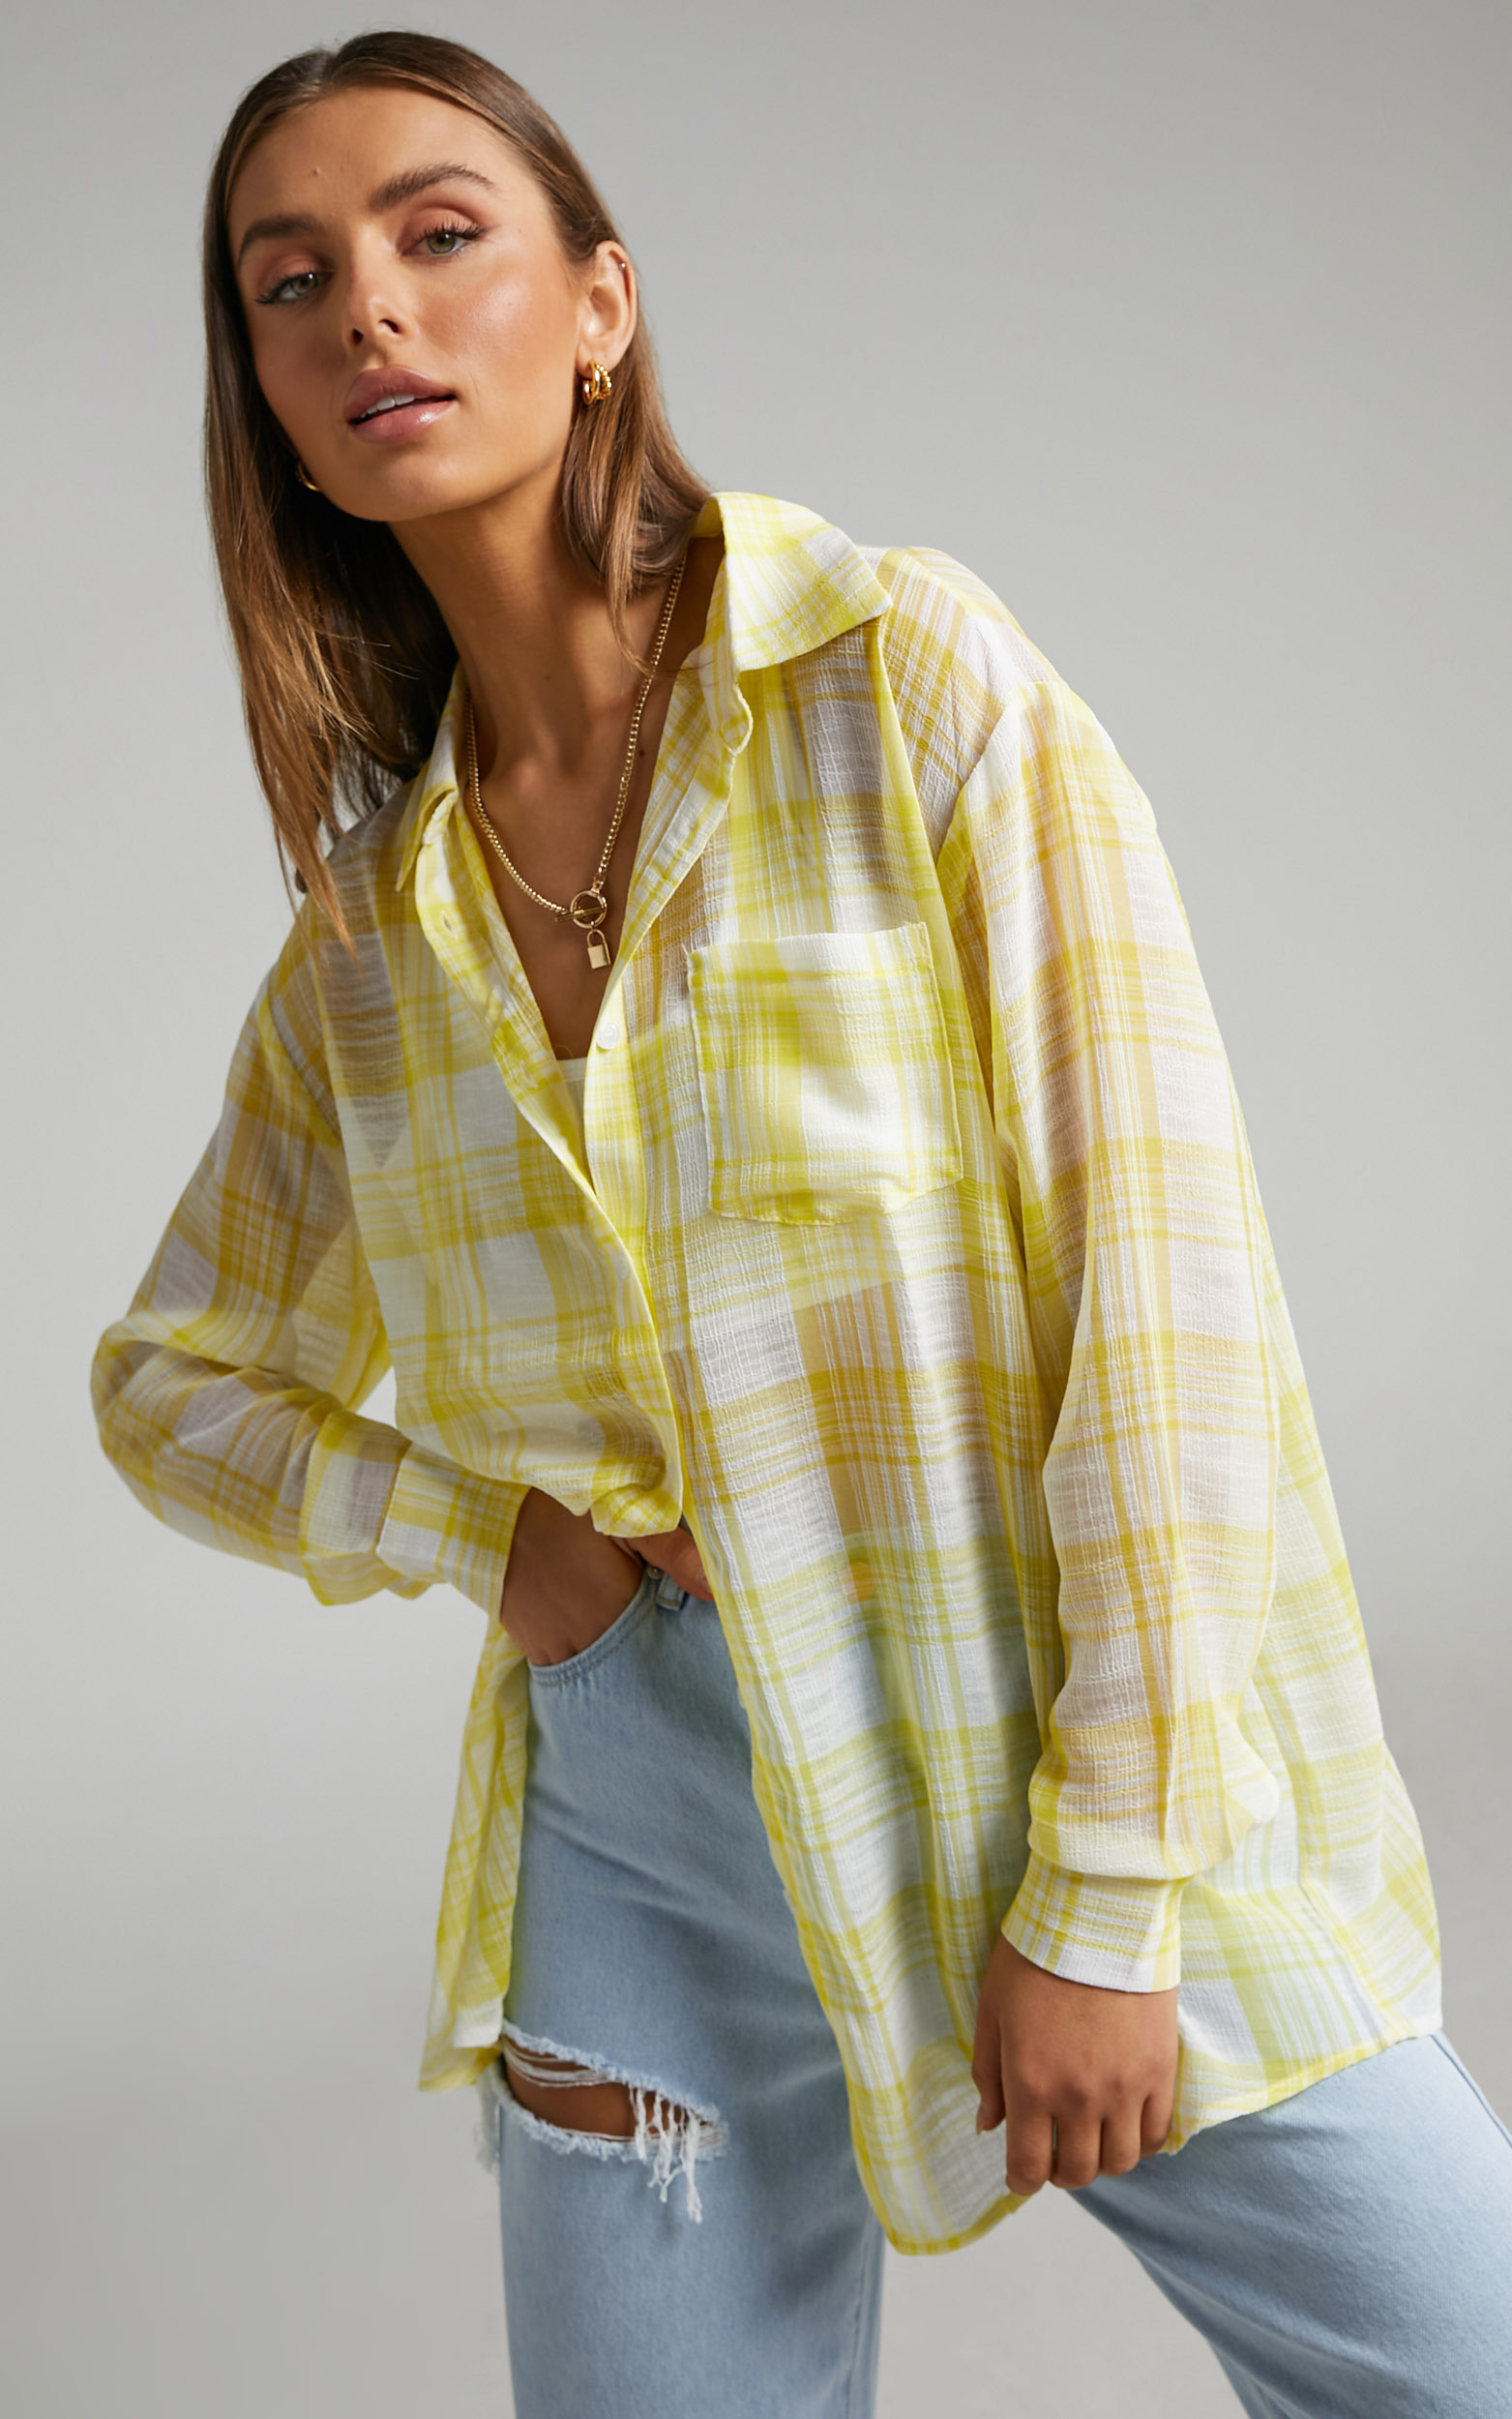 Catania Oversized Sheer Check Shirt in Yellow - 08, YEL1, hi-res image number null